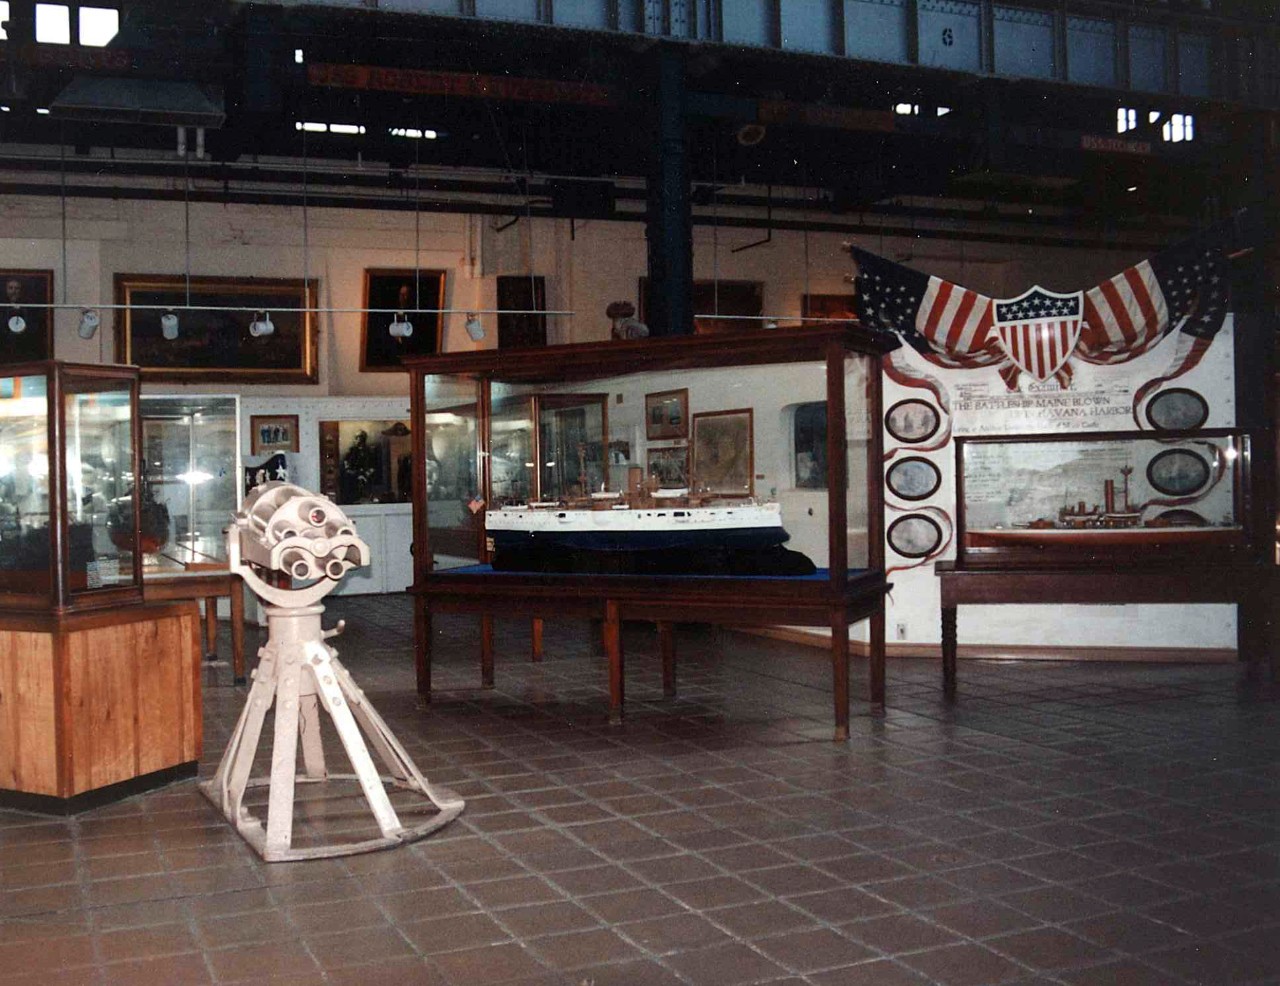 NMUSN-3745: Spanish-American War Exhibit, 1990s. Front of exhibit showing the Hotchkiss Gun. National Museum of the U.S. Navy Photograph Collection.